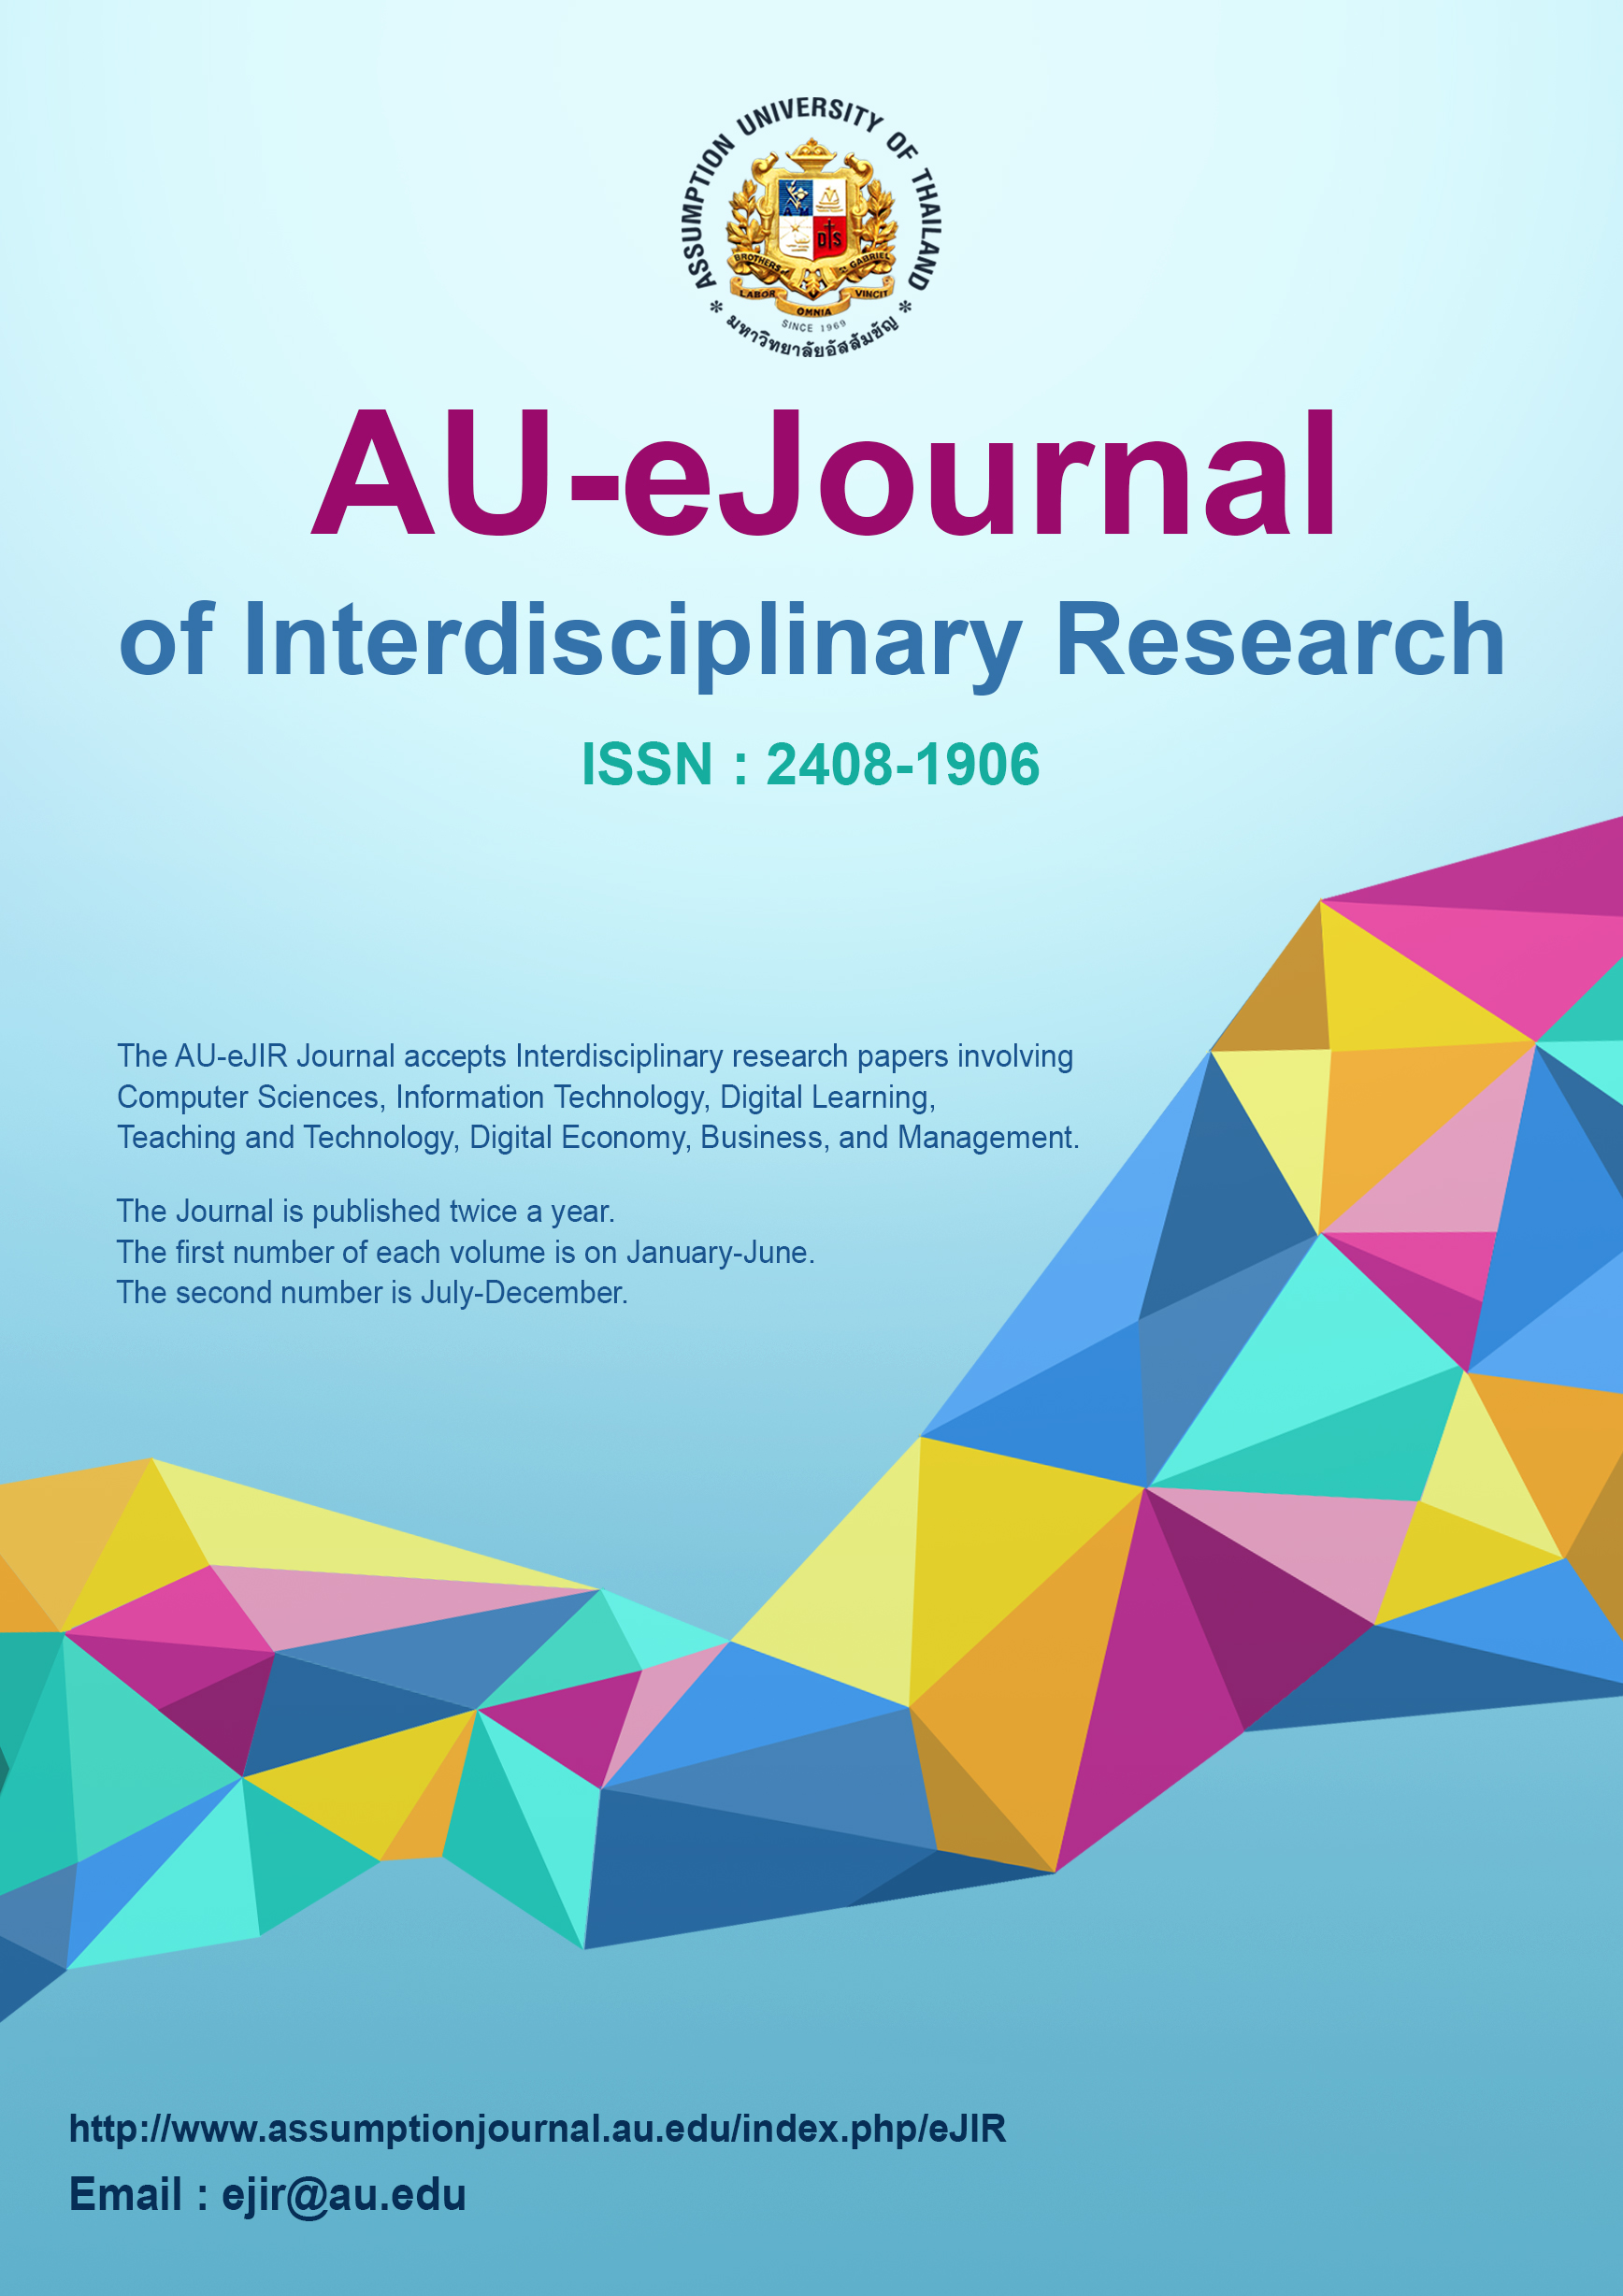 AU-eJournal of Interdisciplinary Research